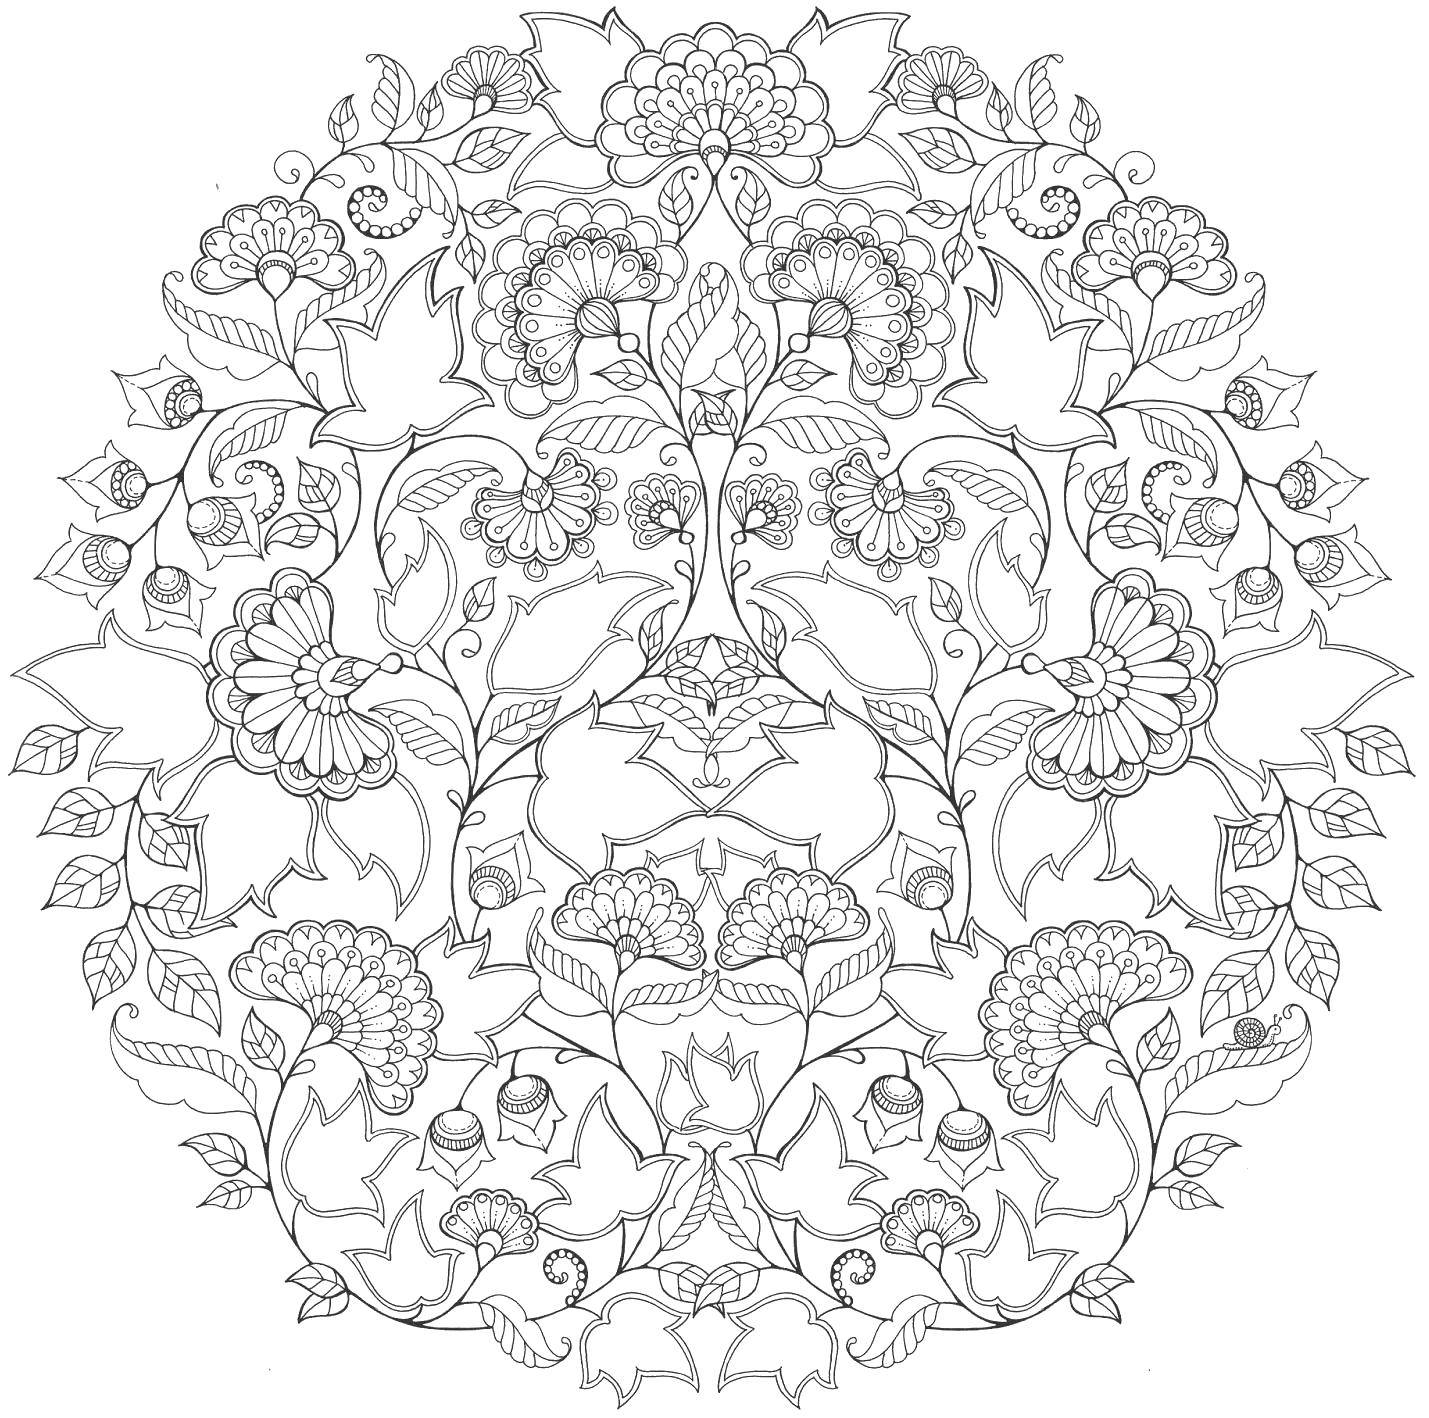 Coloring Floral uzorchiki. Category patterns. Tags:  Patterns, flower.